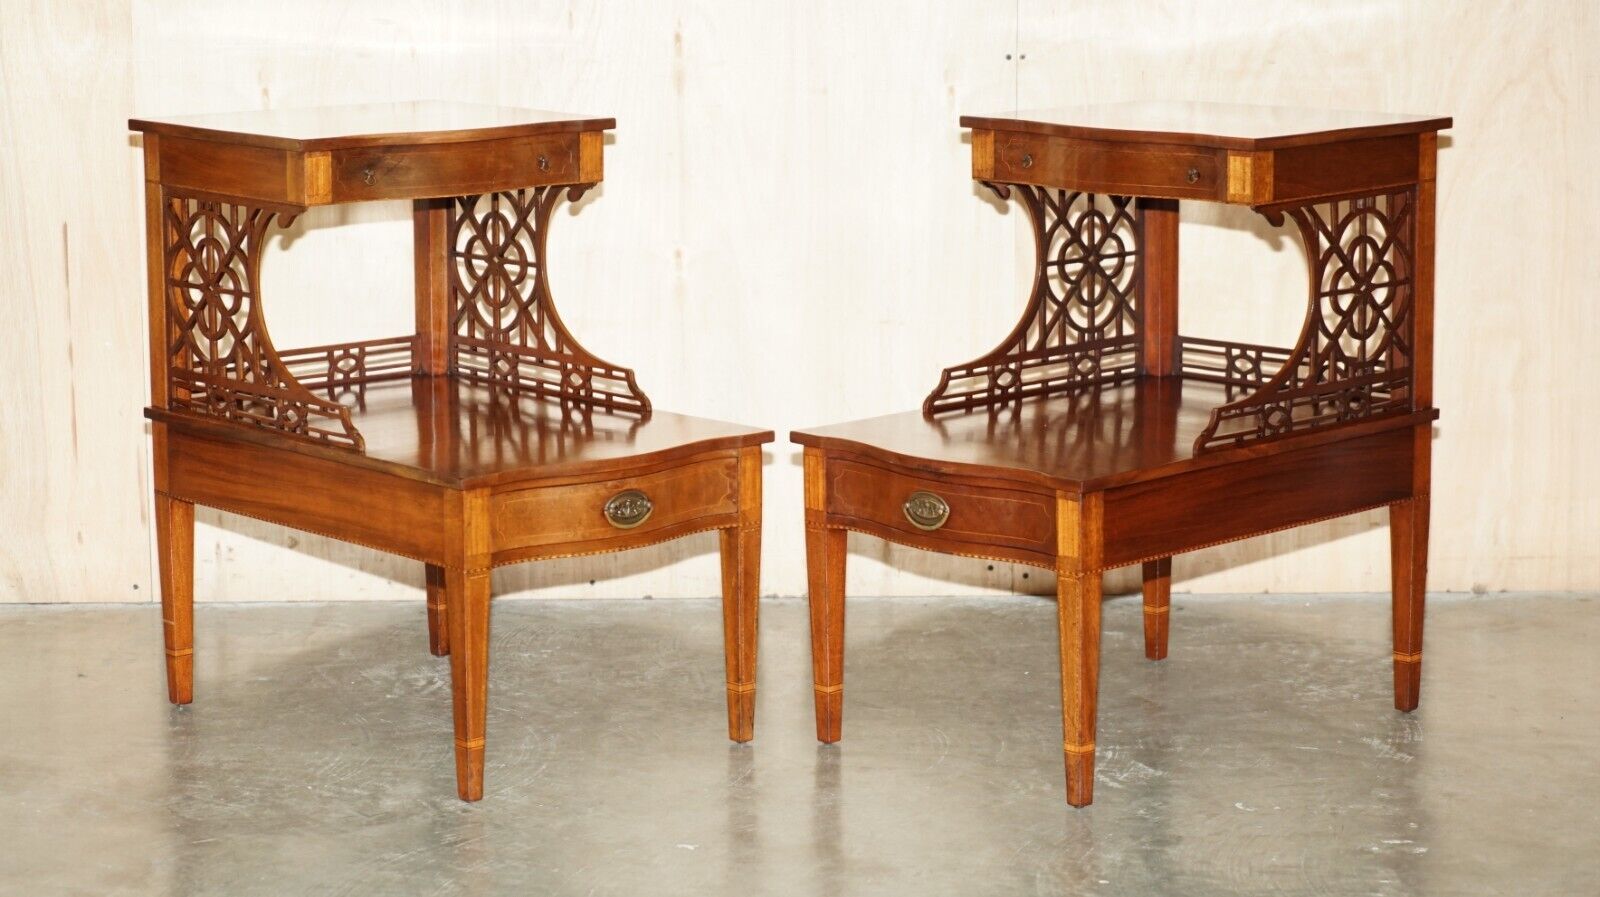 PAIR OF WALNUT FRET WORK CARVED THOMAS CHIPPENDALE SHERATON REVIVAL SIDE TABLES